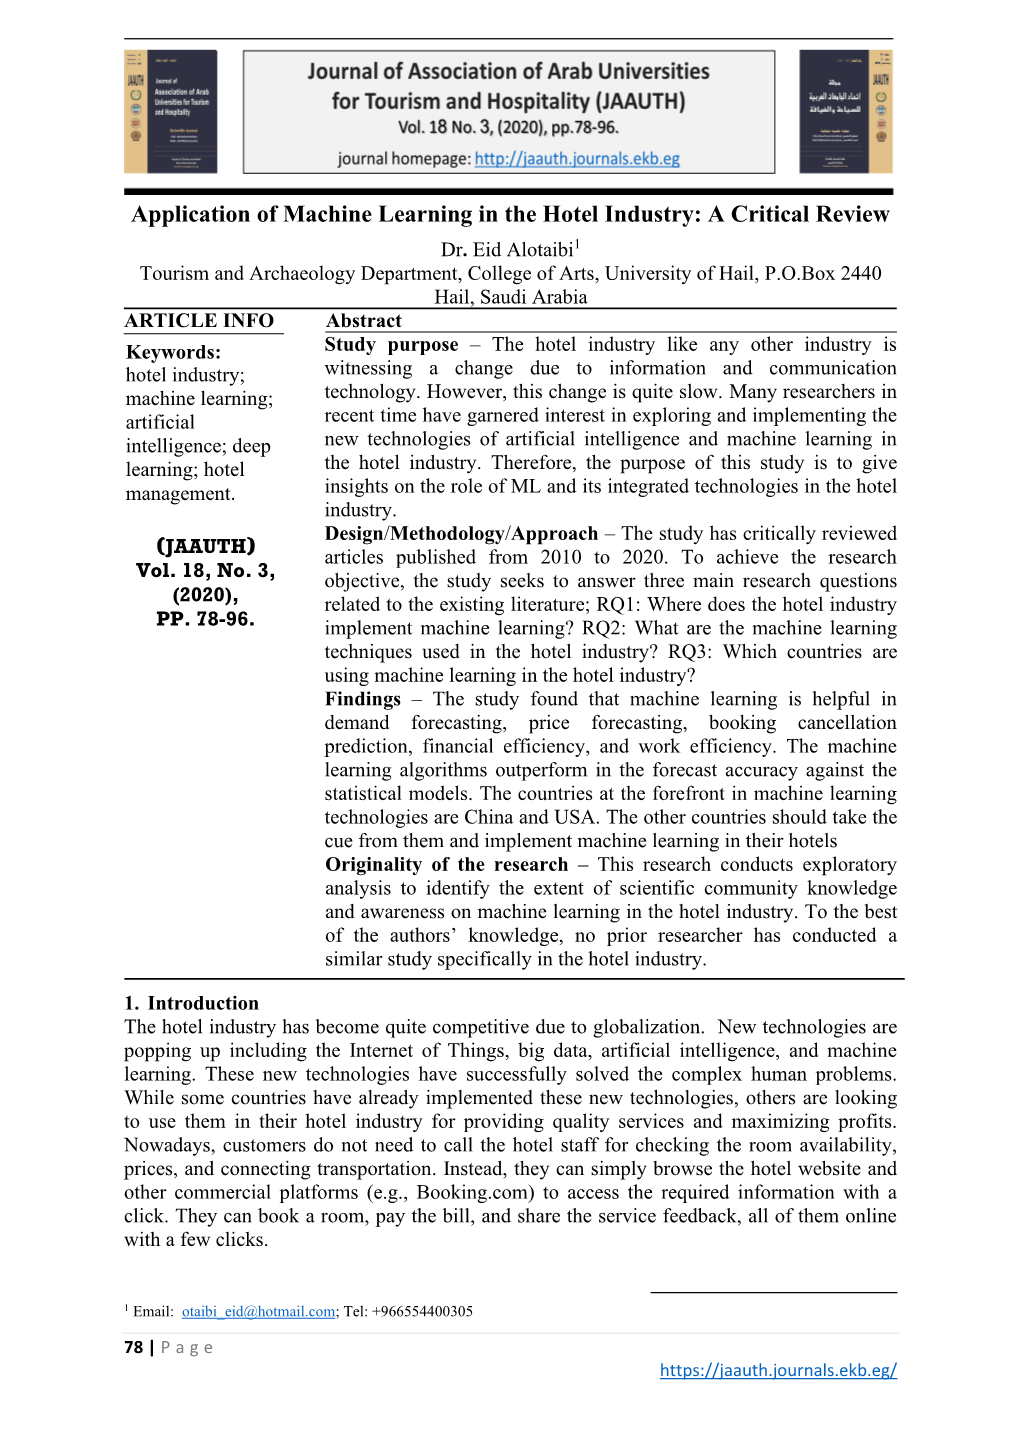 Application of Machine Learning in the Hotel Industry: a Critical Review Dr